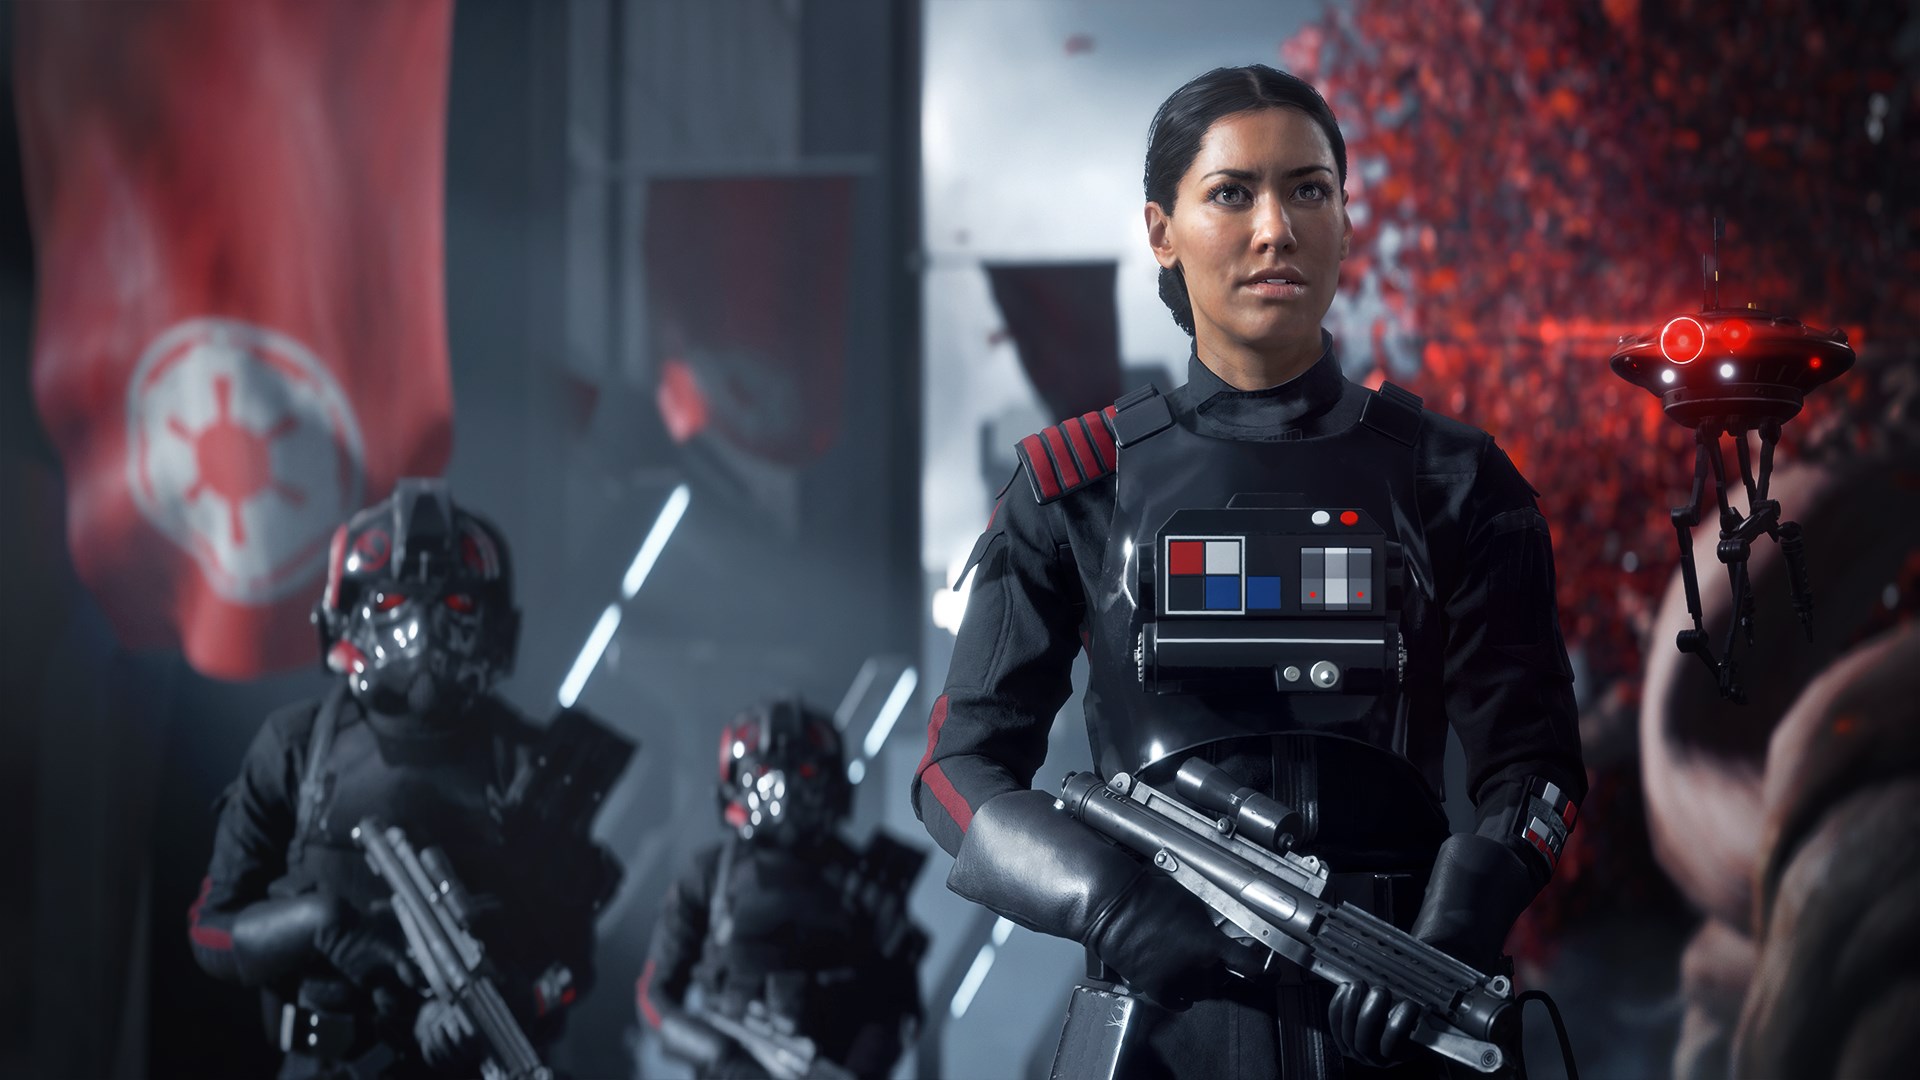 Star Wars Battlefront II: Celebration Edition Is Currently Free On PC